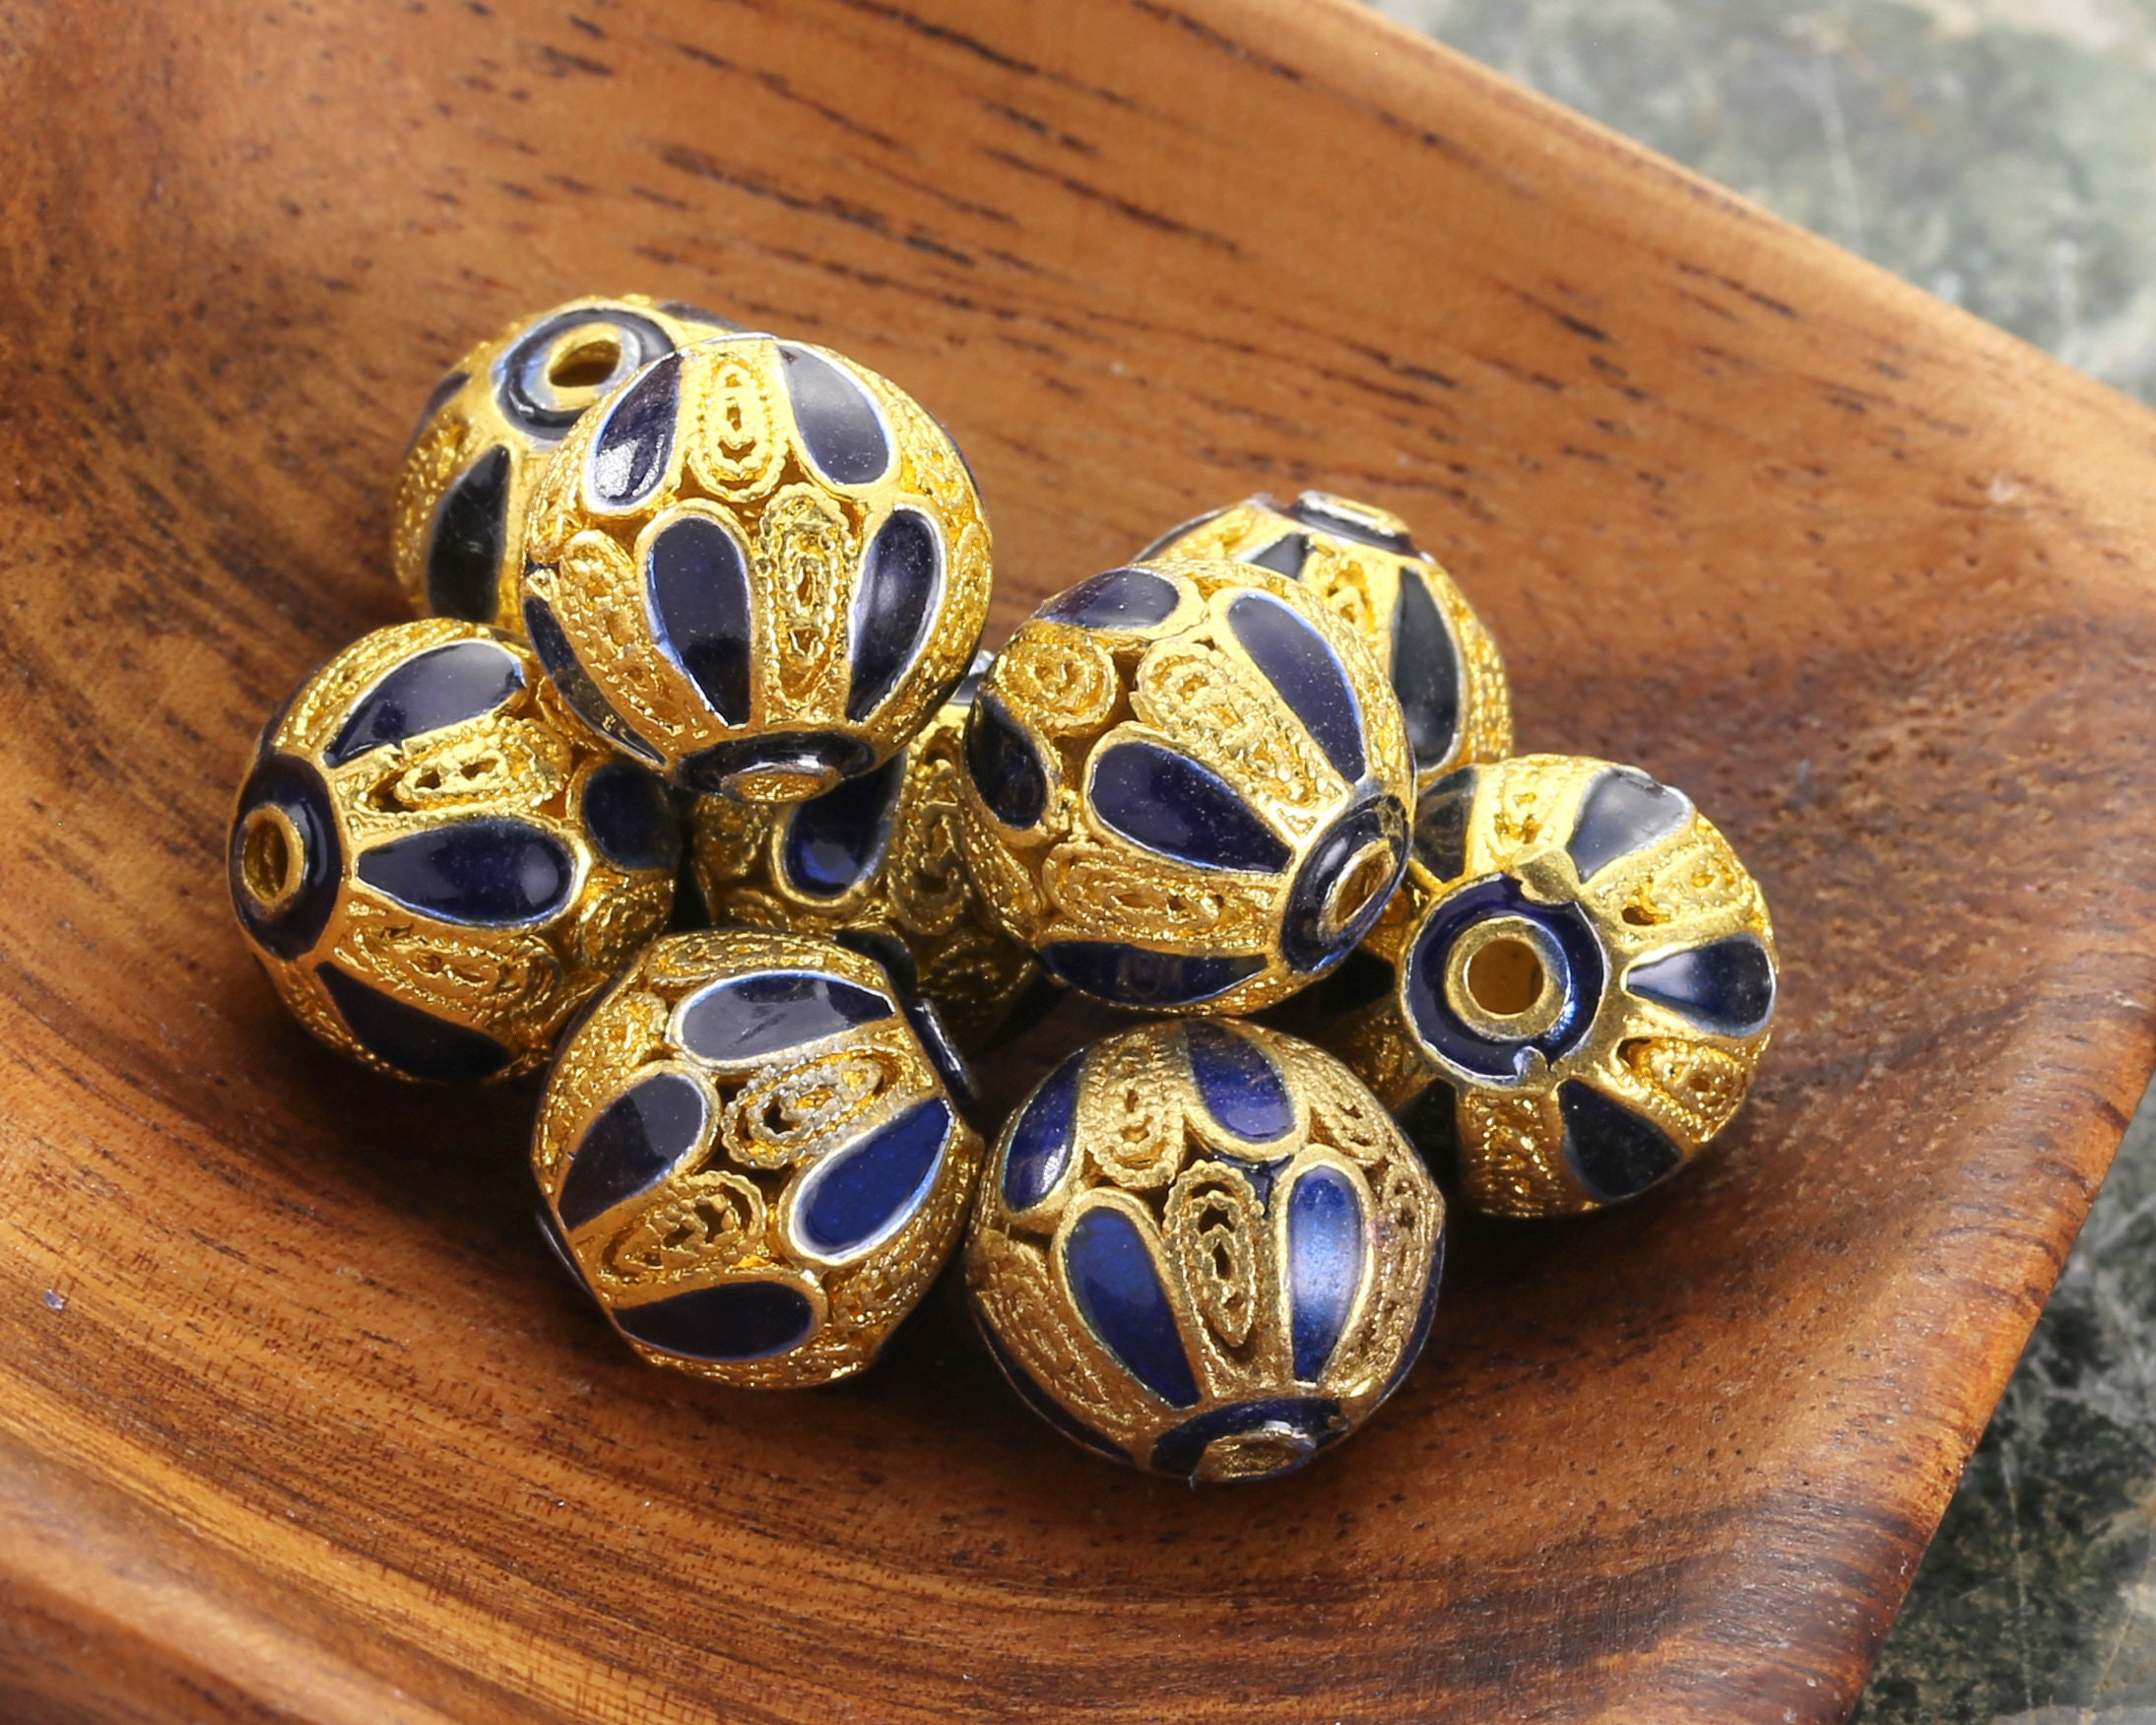 Silver Ball Beads Package of 10 Round, Patterned 8mm Beads for Jewelry  Making Beautiful Quality 